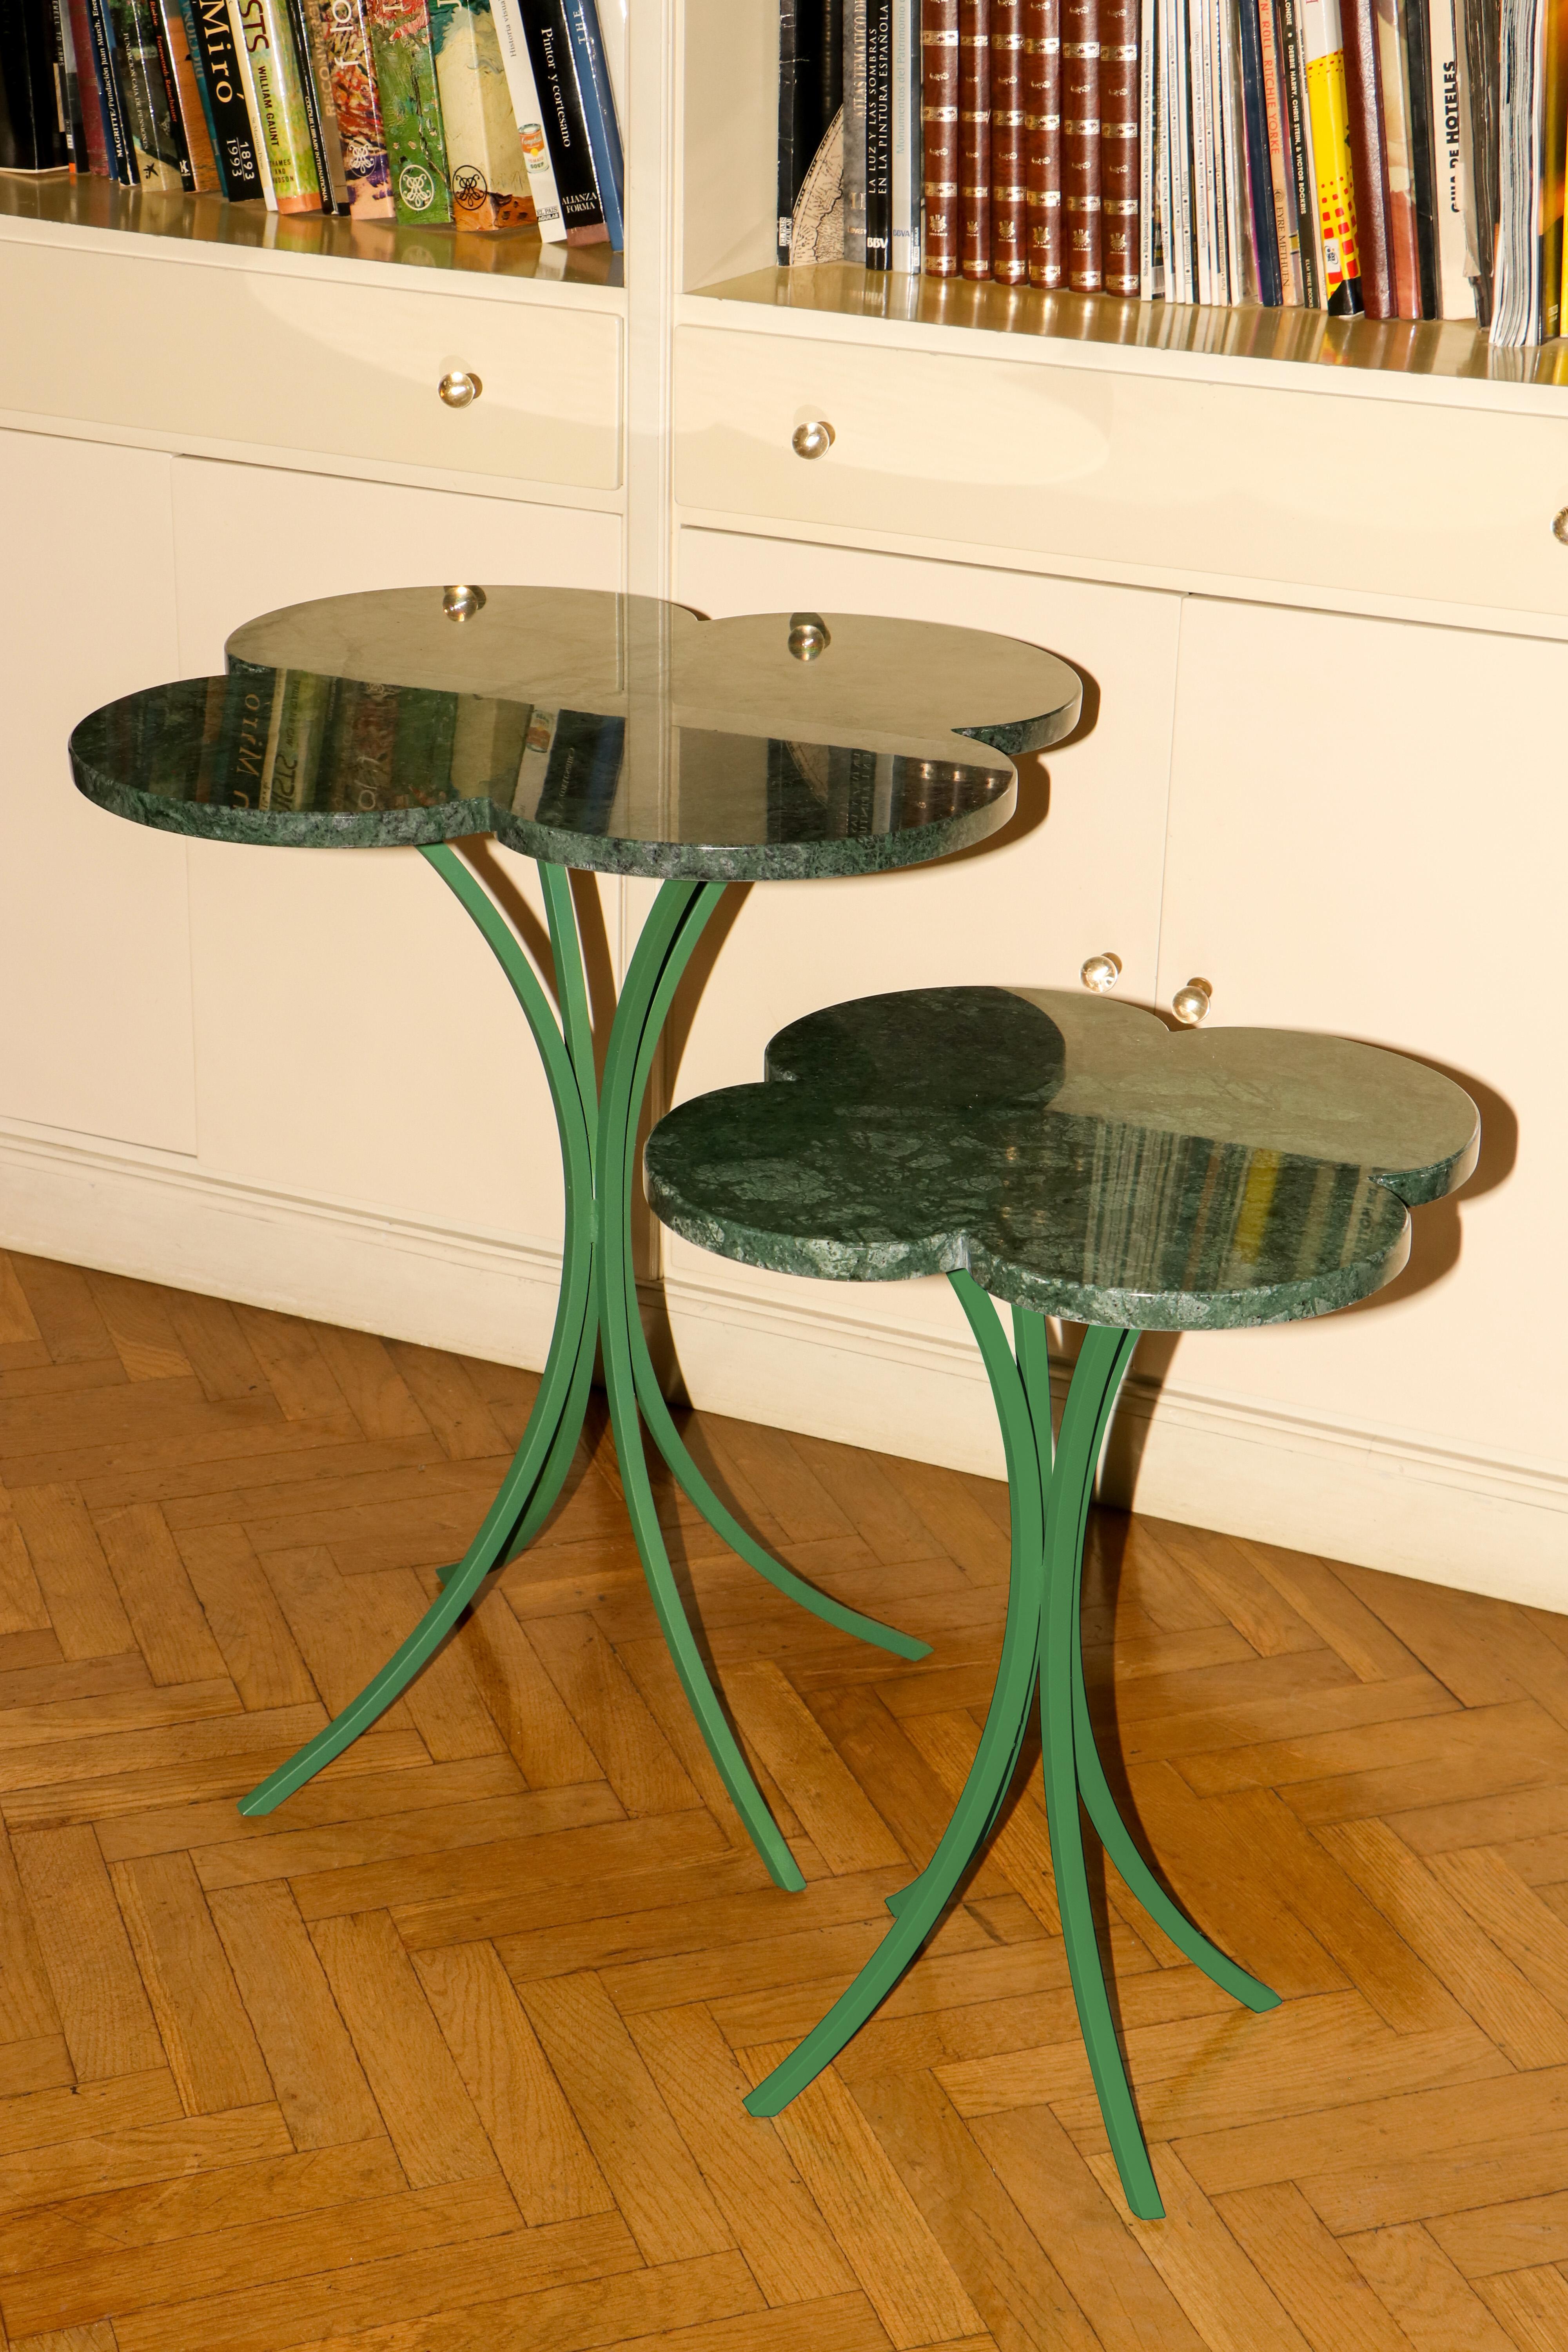 Clover is a side table made of a green smooth polished marble top and wrought iron forest green coloured legs. Its curves recreate the clover flower in an elegant and clean style.

Two available sizes. It can be used as a bedside or coffee